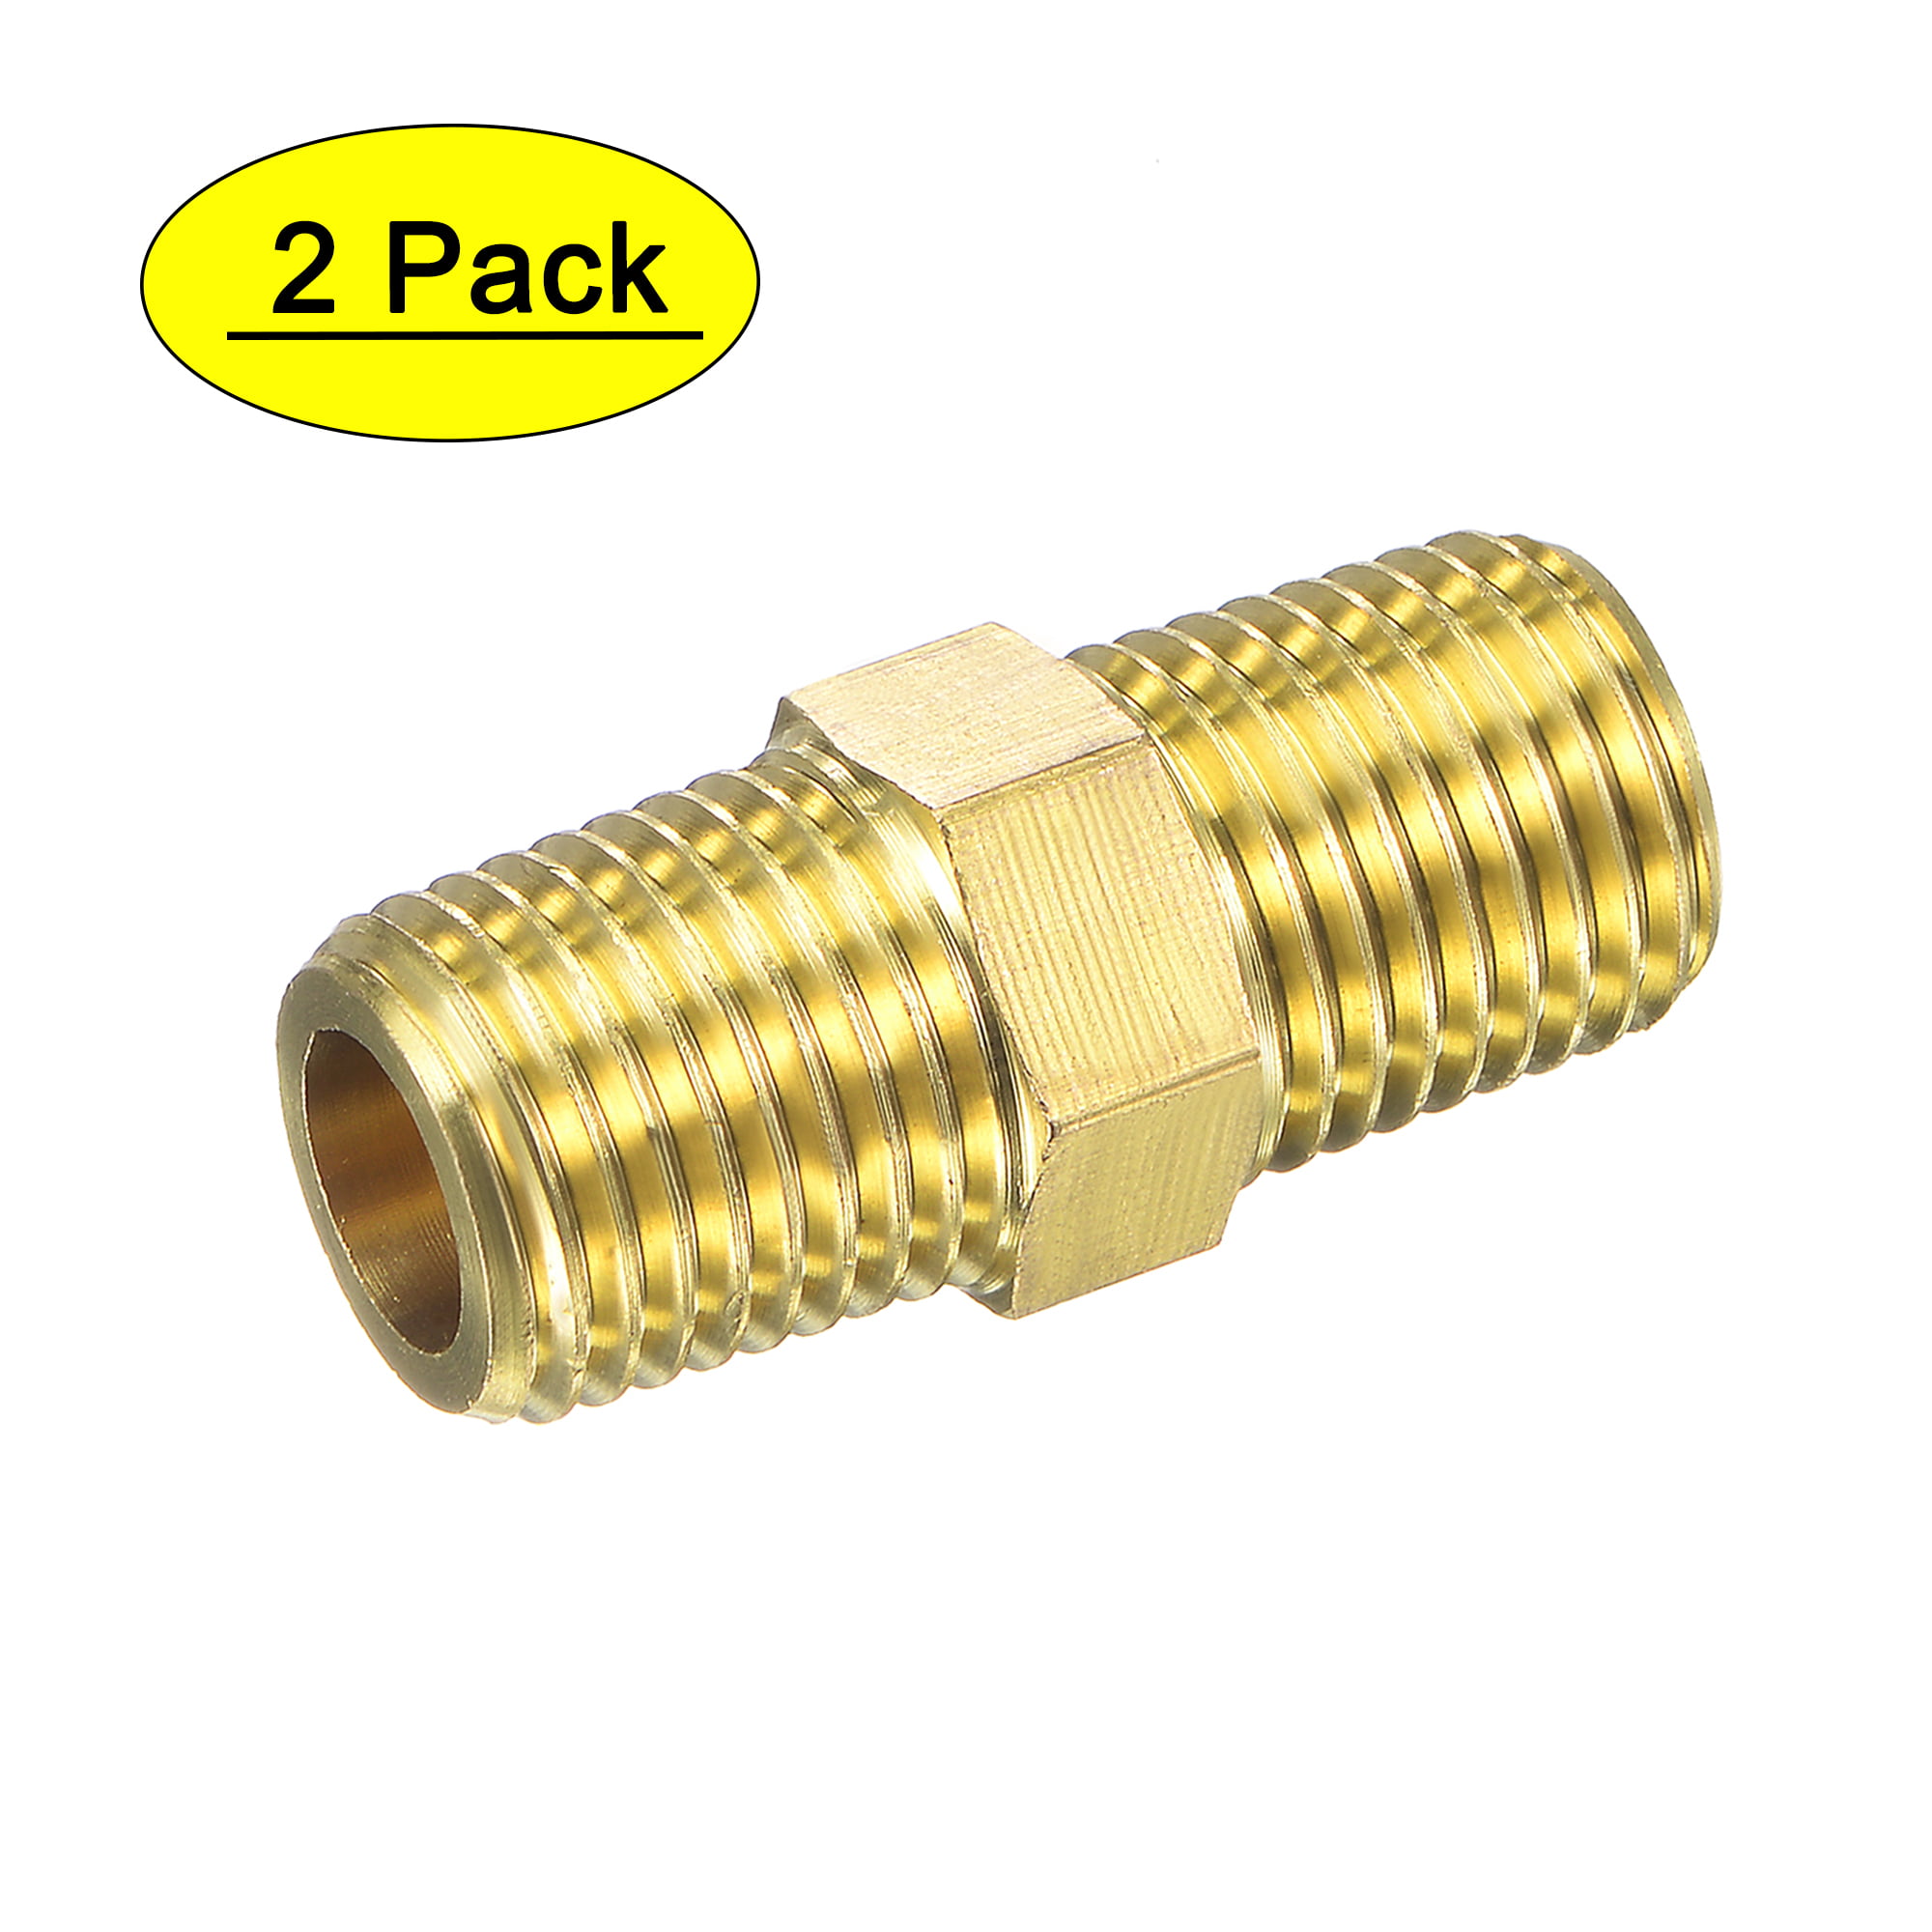 BRASS PIPE COUPLING 1 ¾ ½ ¼ Straight Female Compression Joiner BSP Gas Water Oil